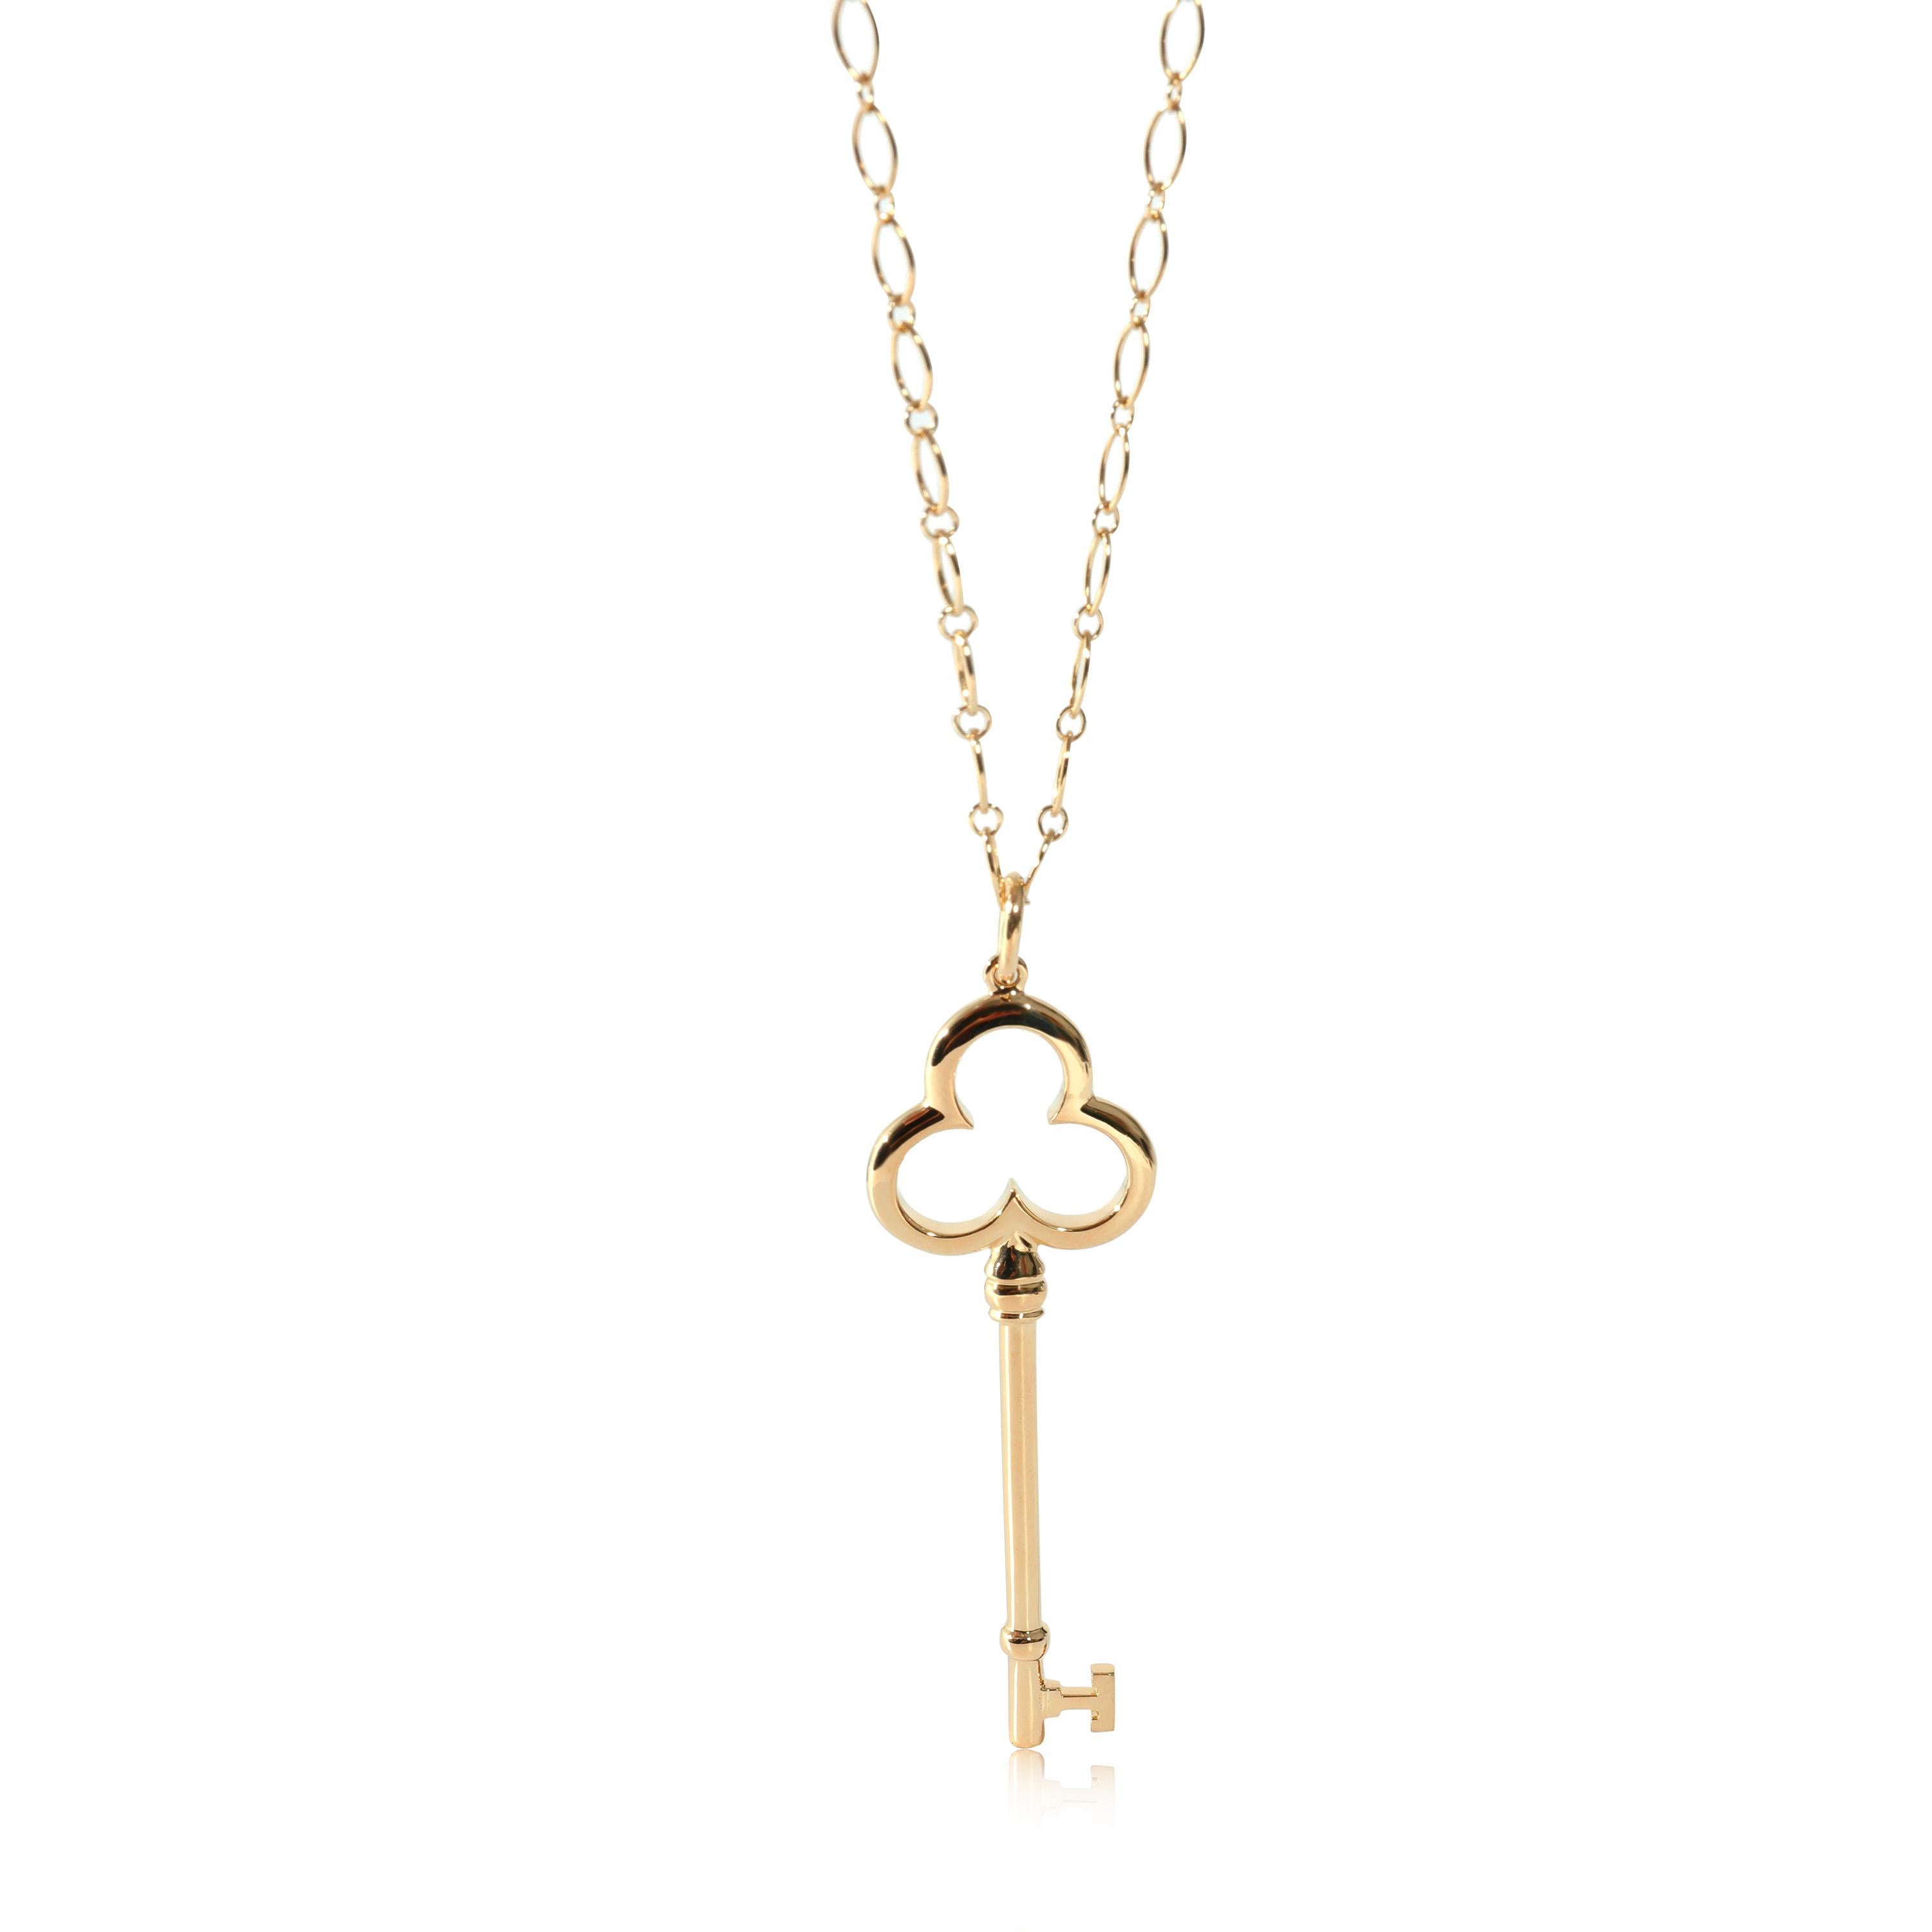 Tiffany & Co. Trefoil Key Pendant Necklace in 18KT Yellow Gold In Excellent Condition For Sale In New York, NY